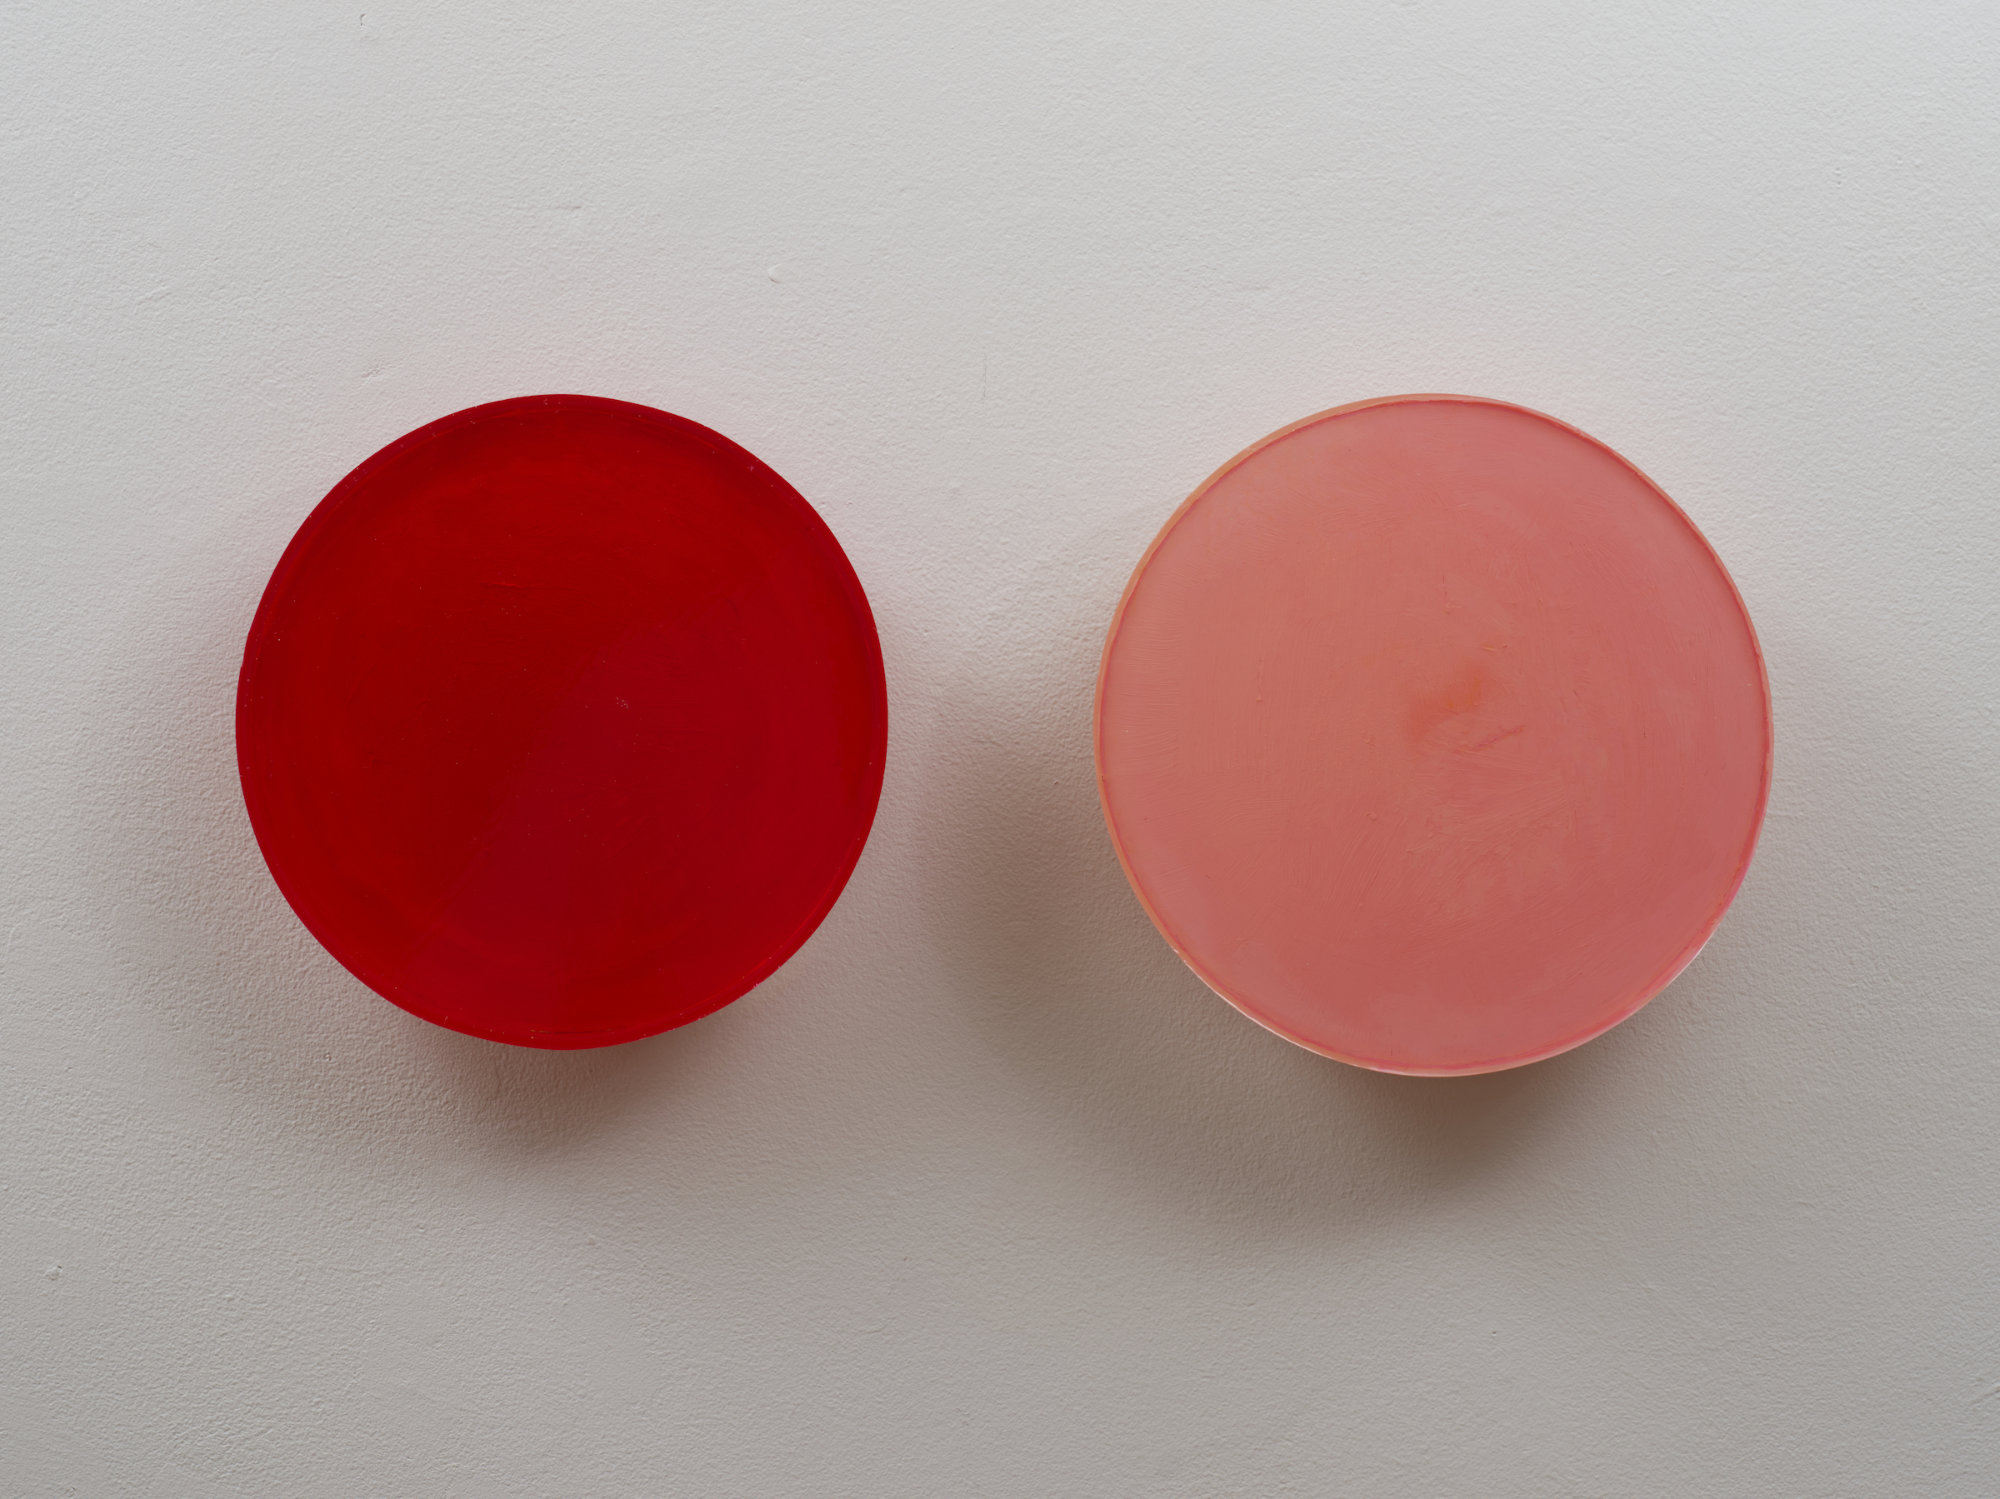 Resin Work titled "Red and Pink" By Ana Rendich Les Yeux du Monde